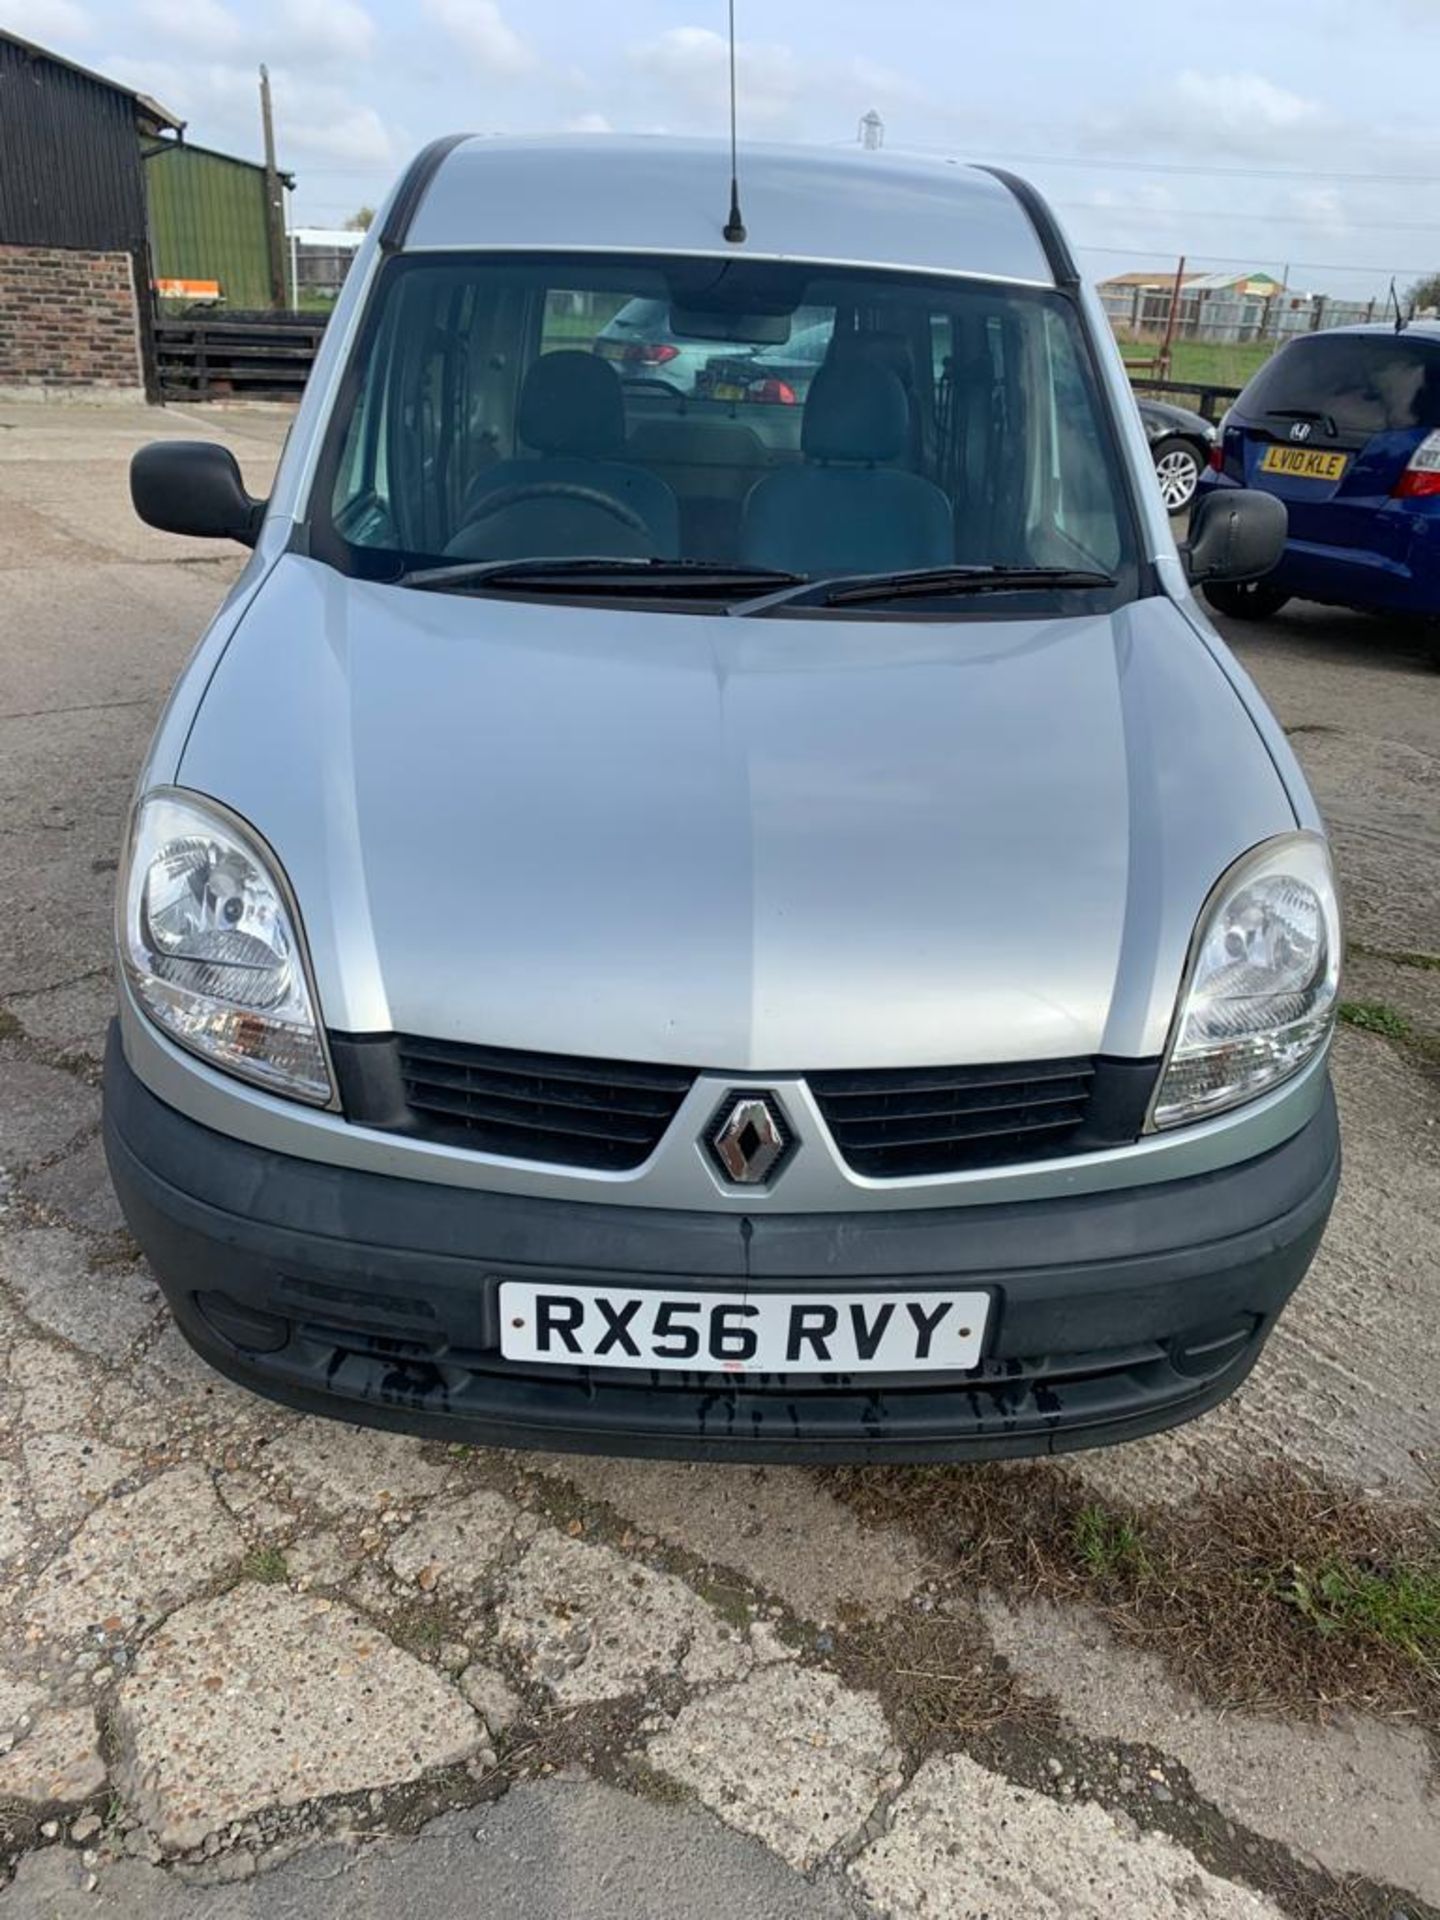 Renault Kangoo Authentique panel van, registration number RX56RVY, first registered 27/02/2007 with - Image 2 of 13